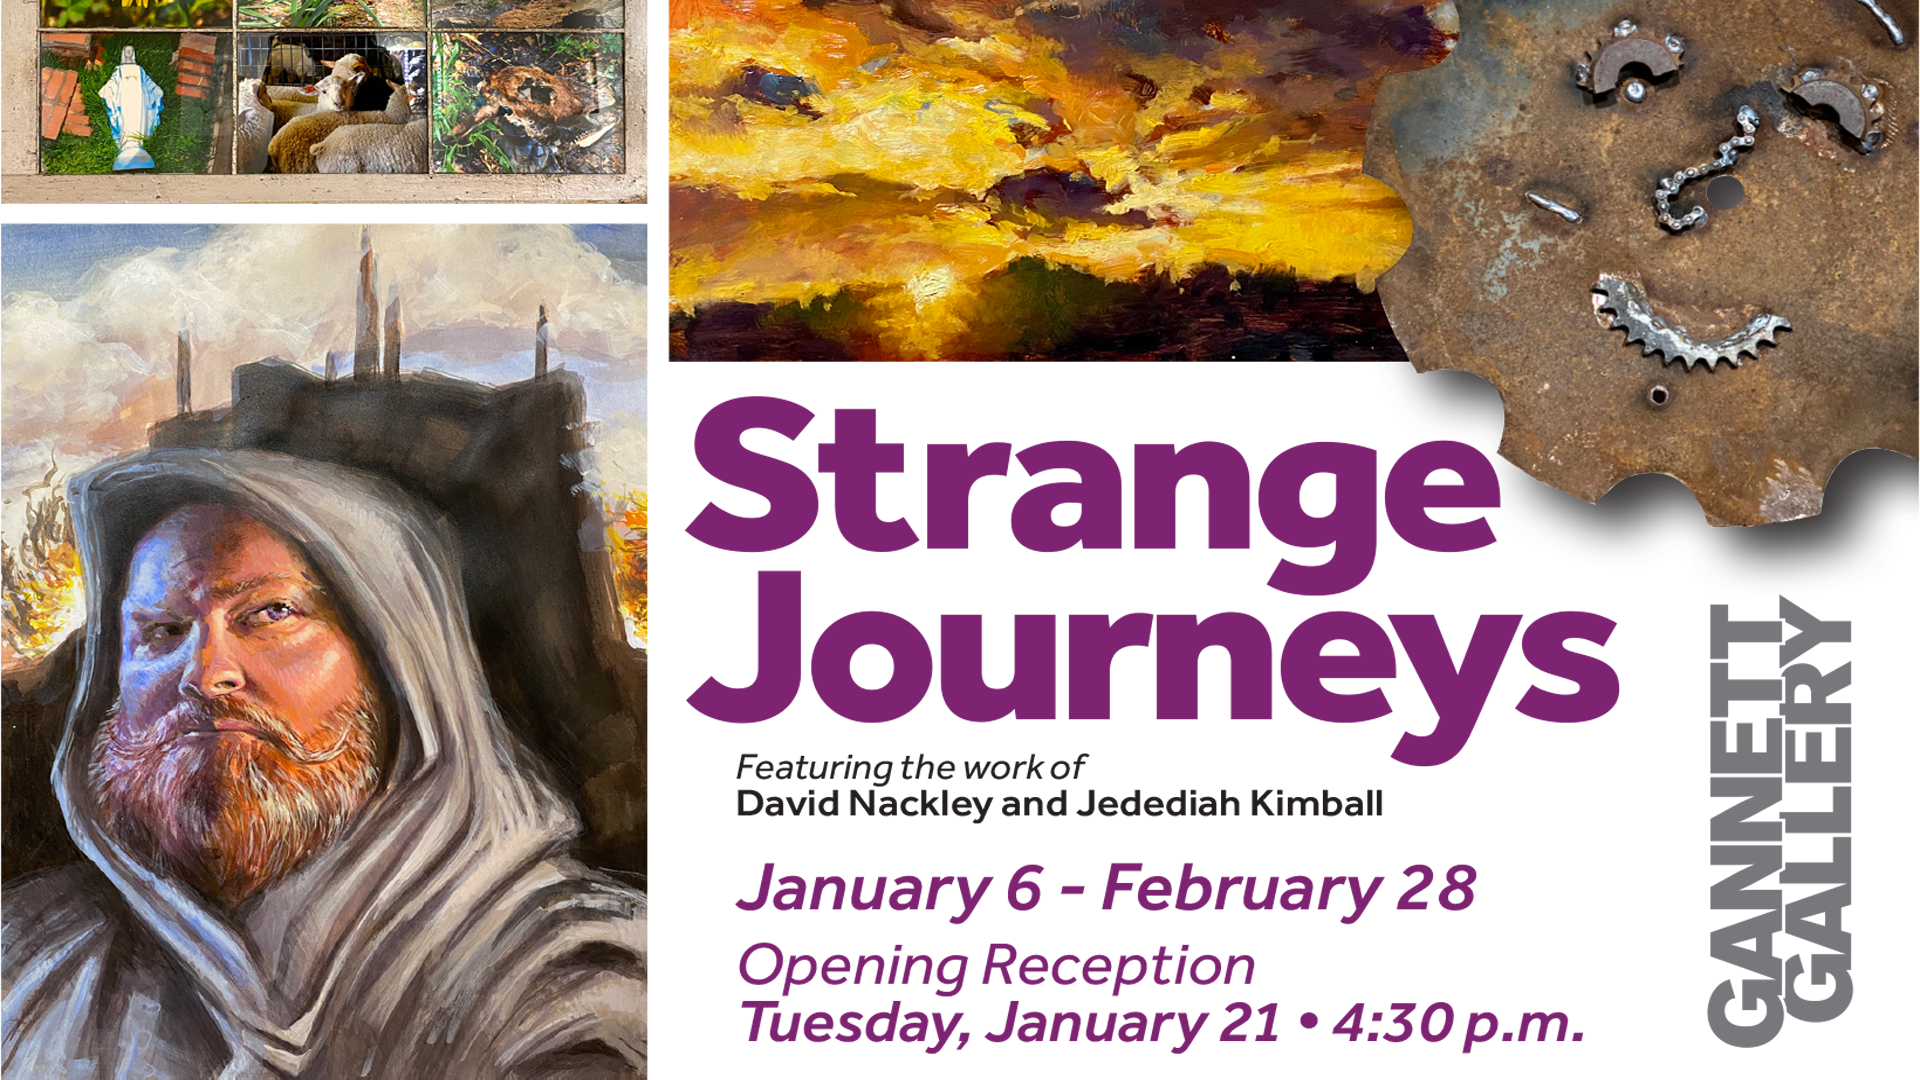 Join us for the Opening Reception January 21, 2020 at 4:30pm in the Gannett Gallery